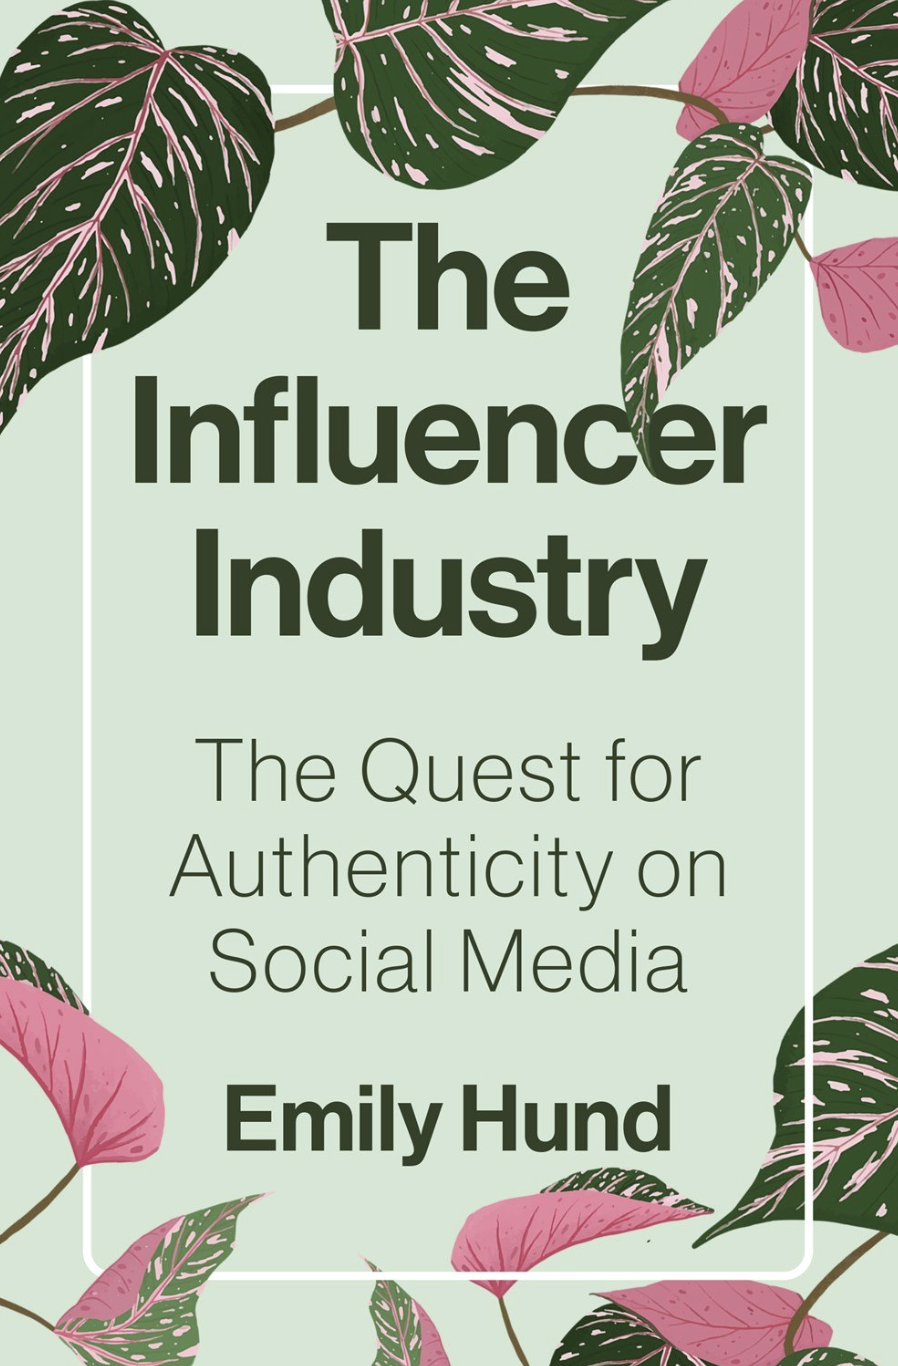 The Influencer Industry - Emily Hund